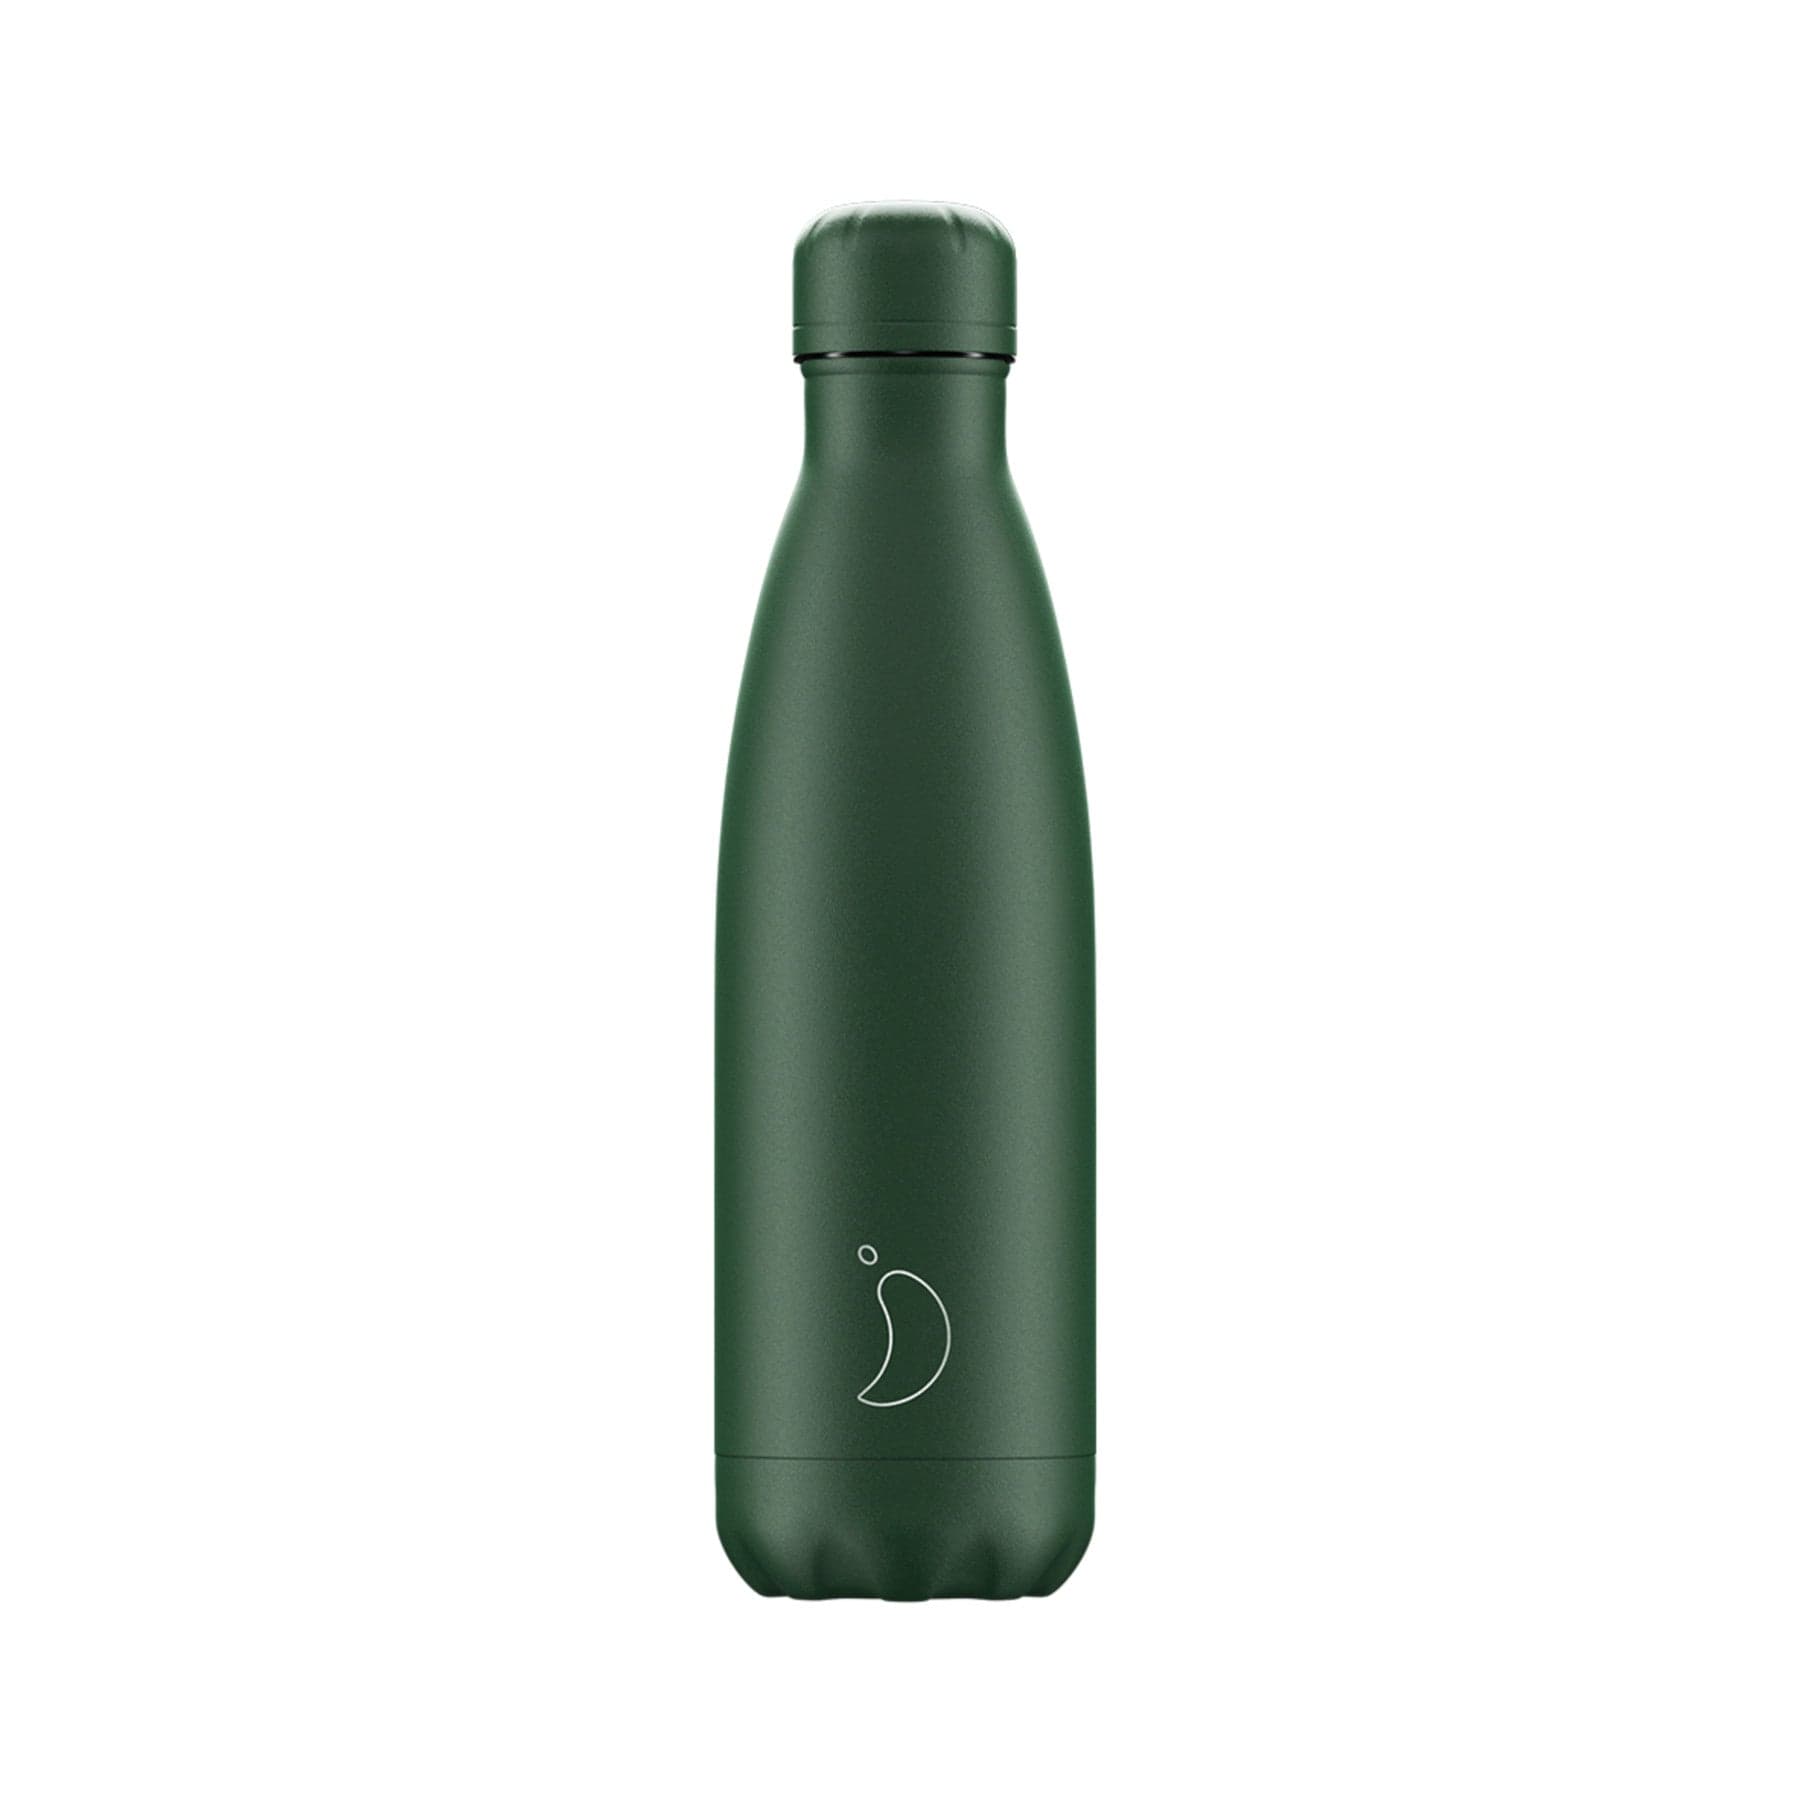 Green insulated stainless steel water bottle with a sleek design and logo on white background